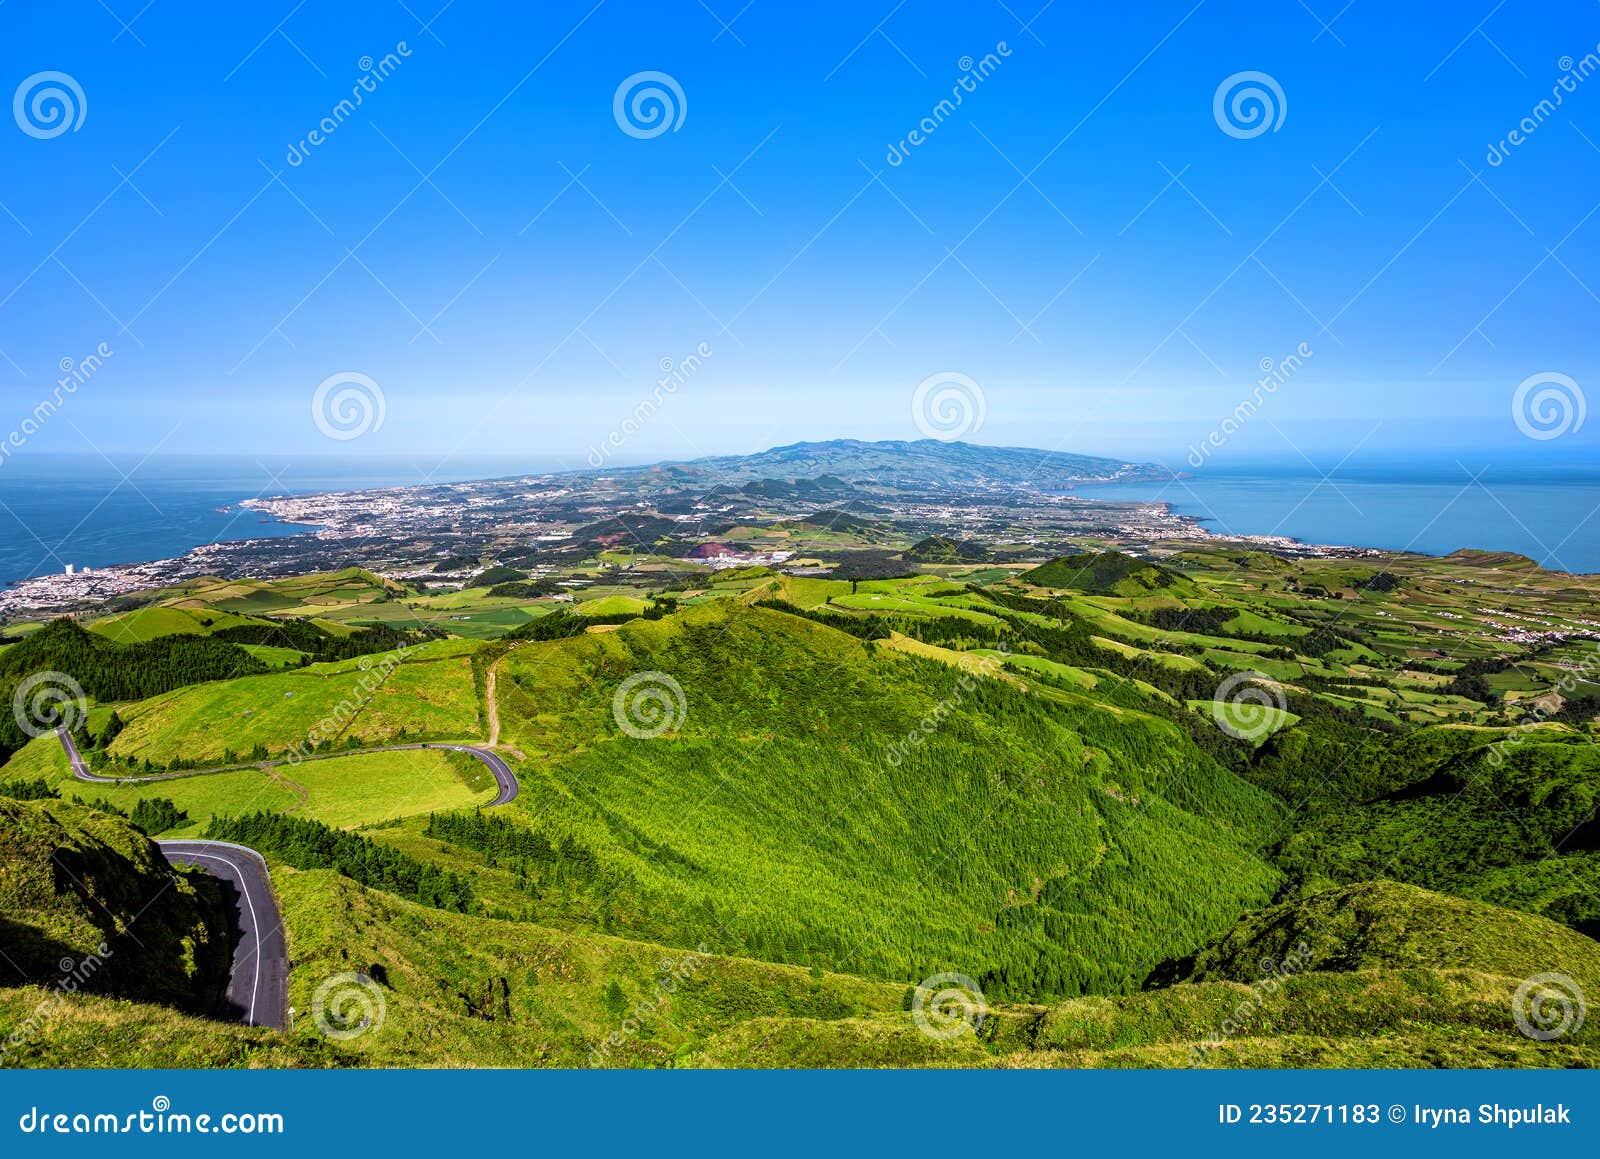 view of the western part of sao miguel island, azores, aÃÂ§ores, portugal, europe